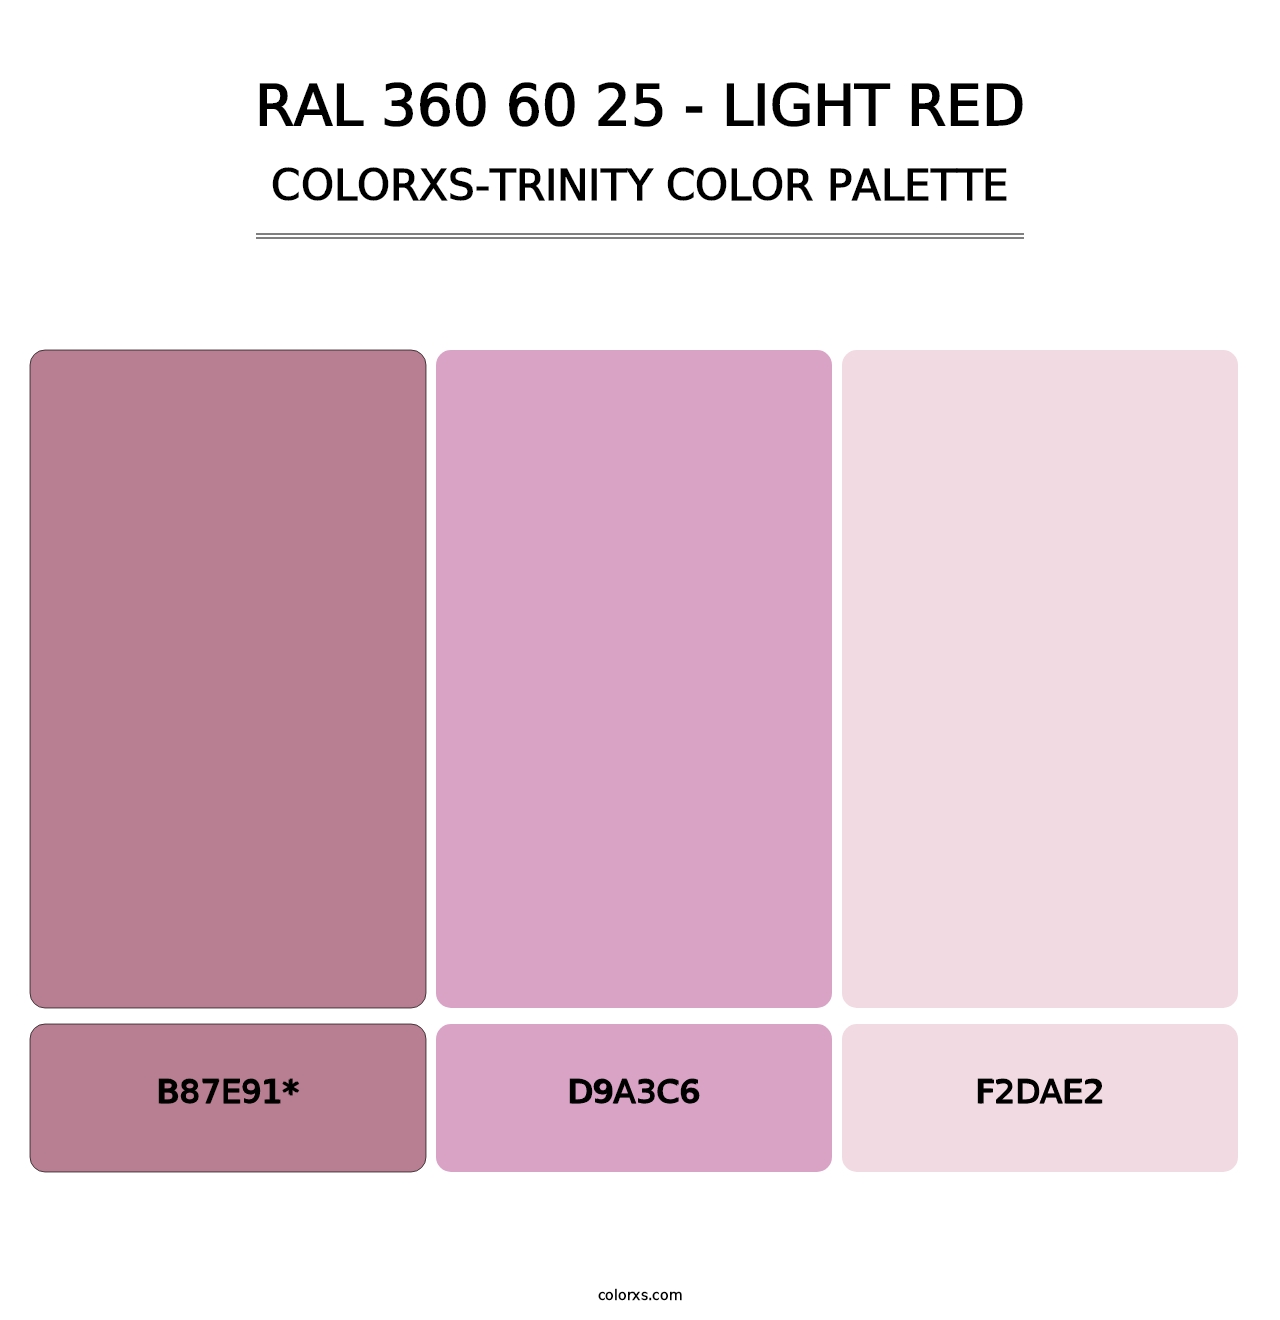 RAL 360 60 25 - Light Red - Colorxs Trinity Palette